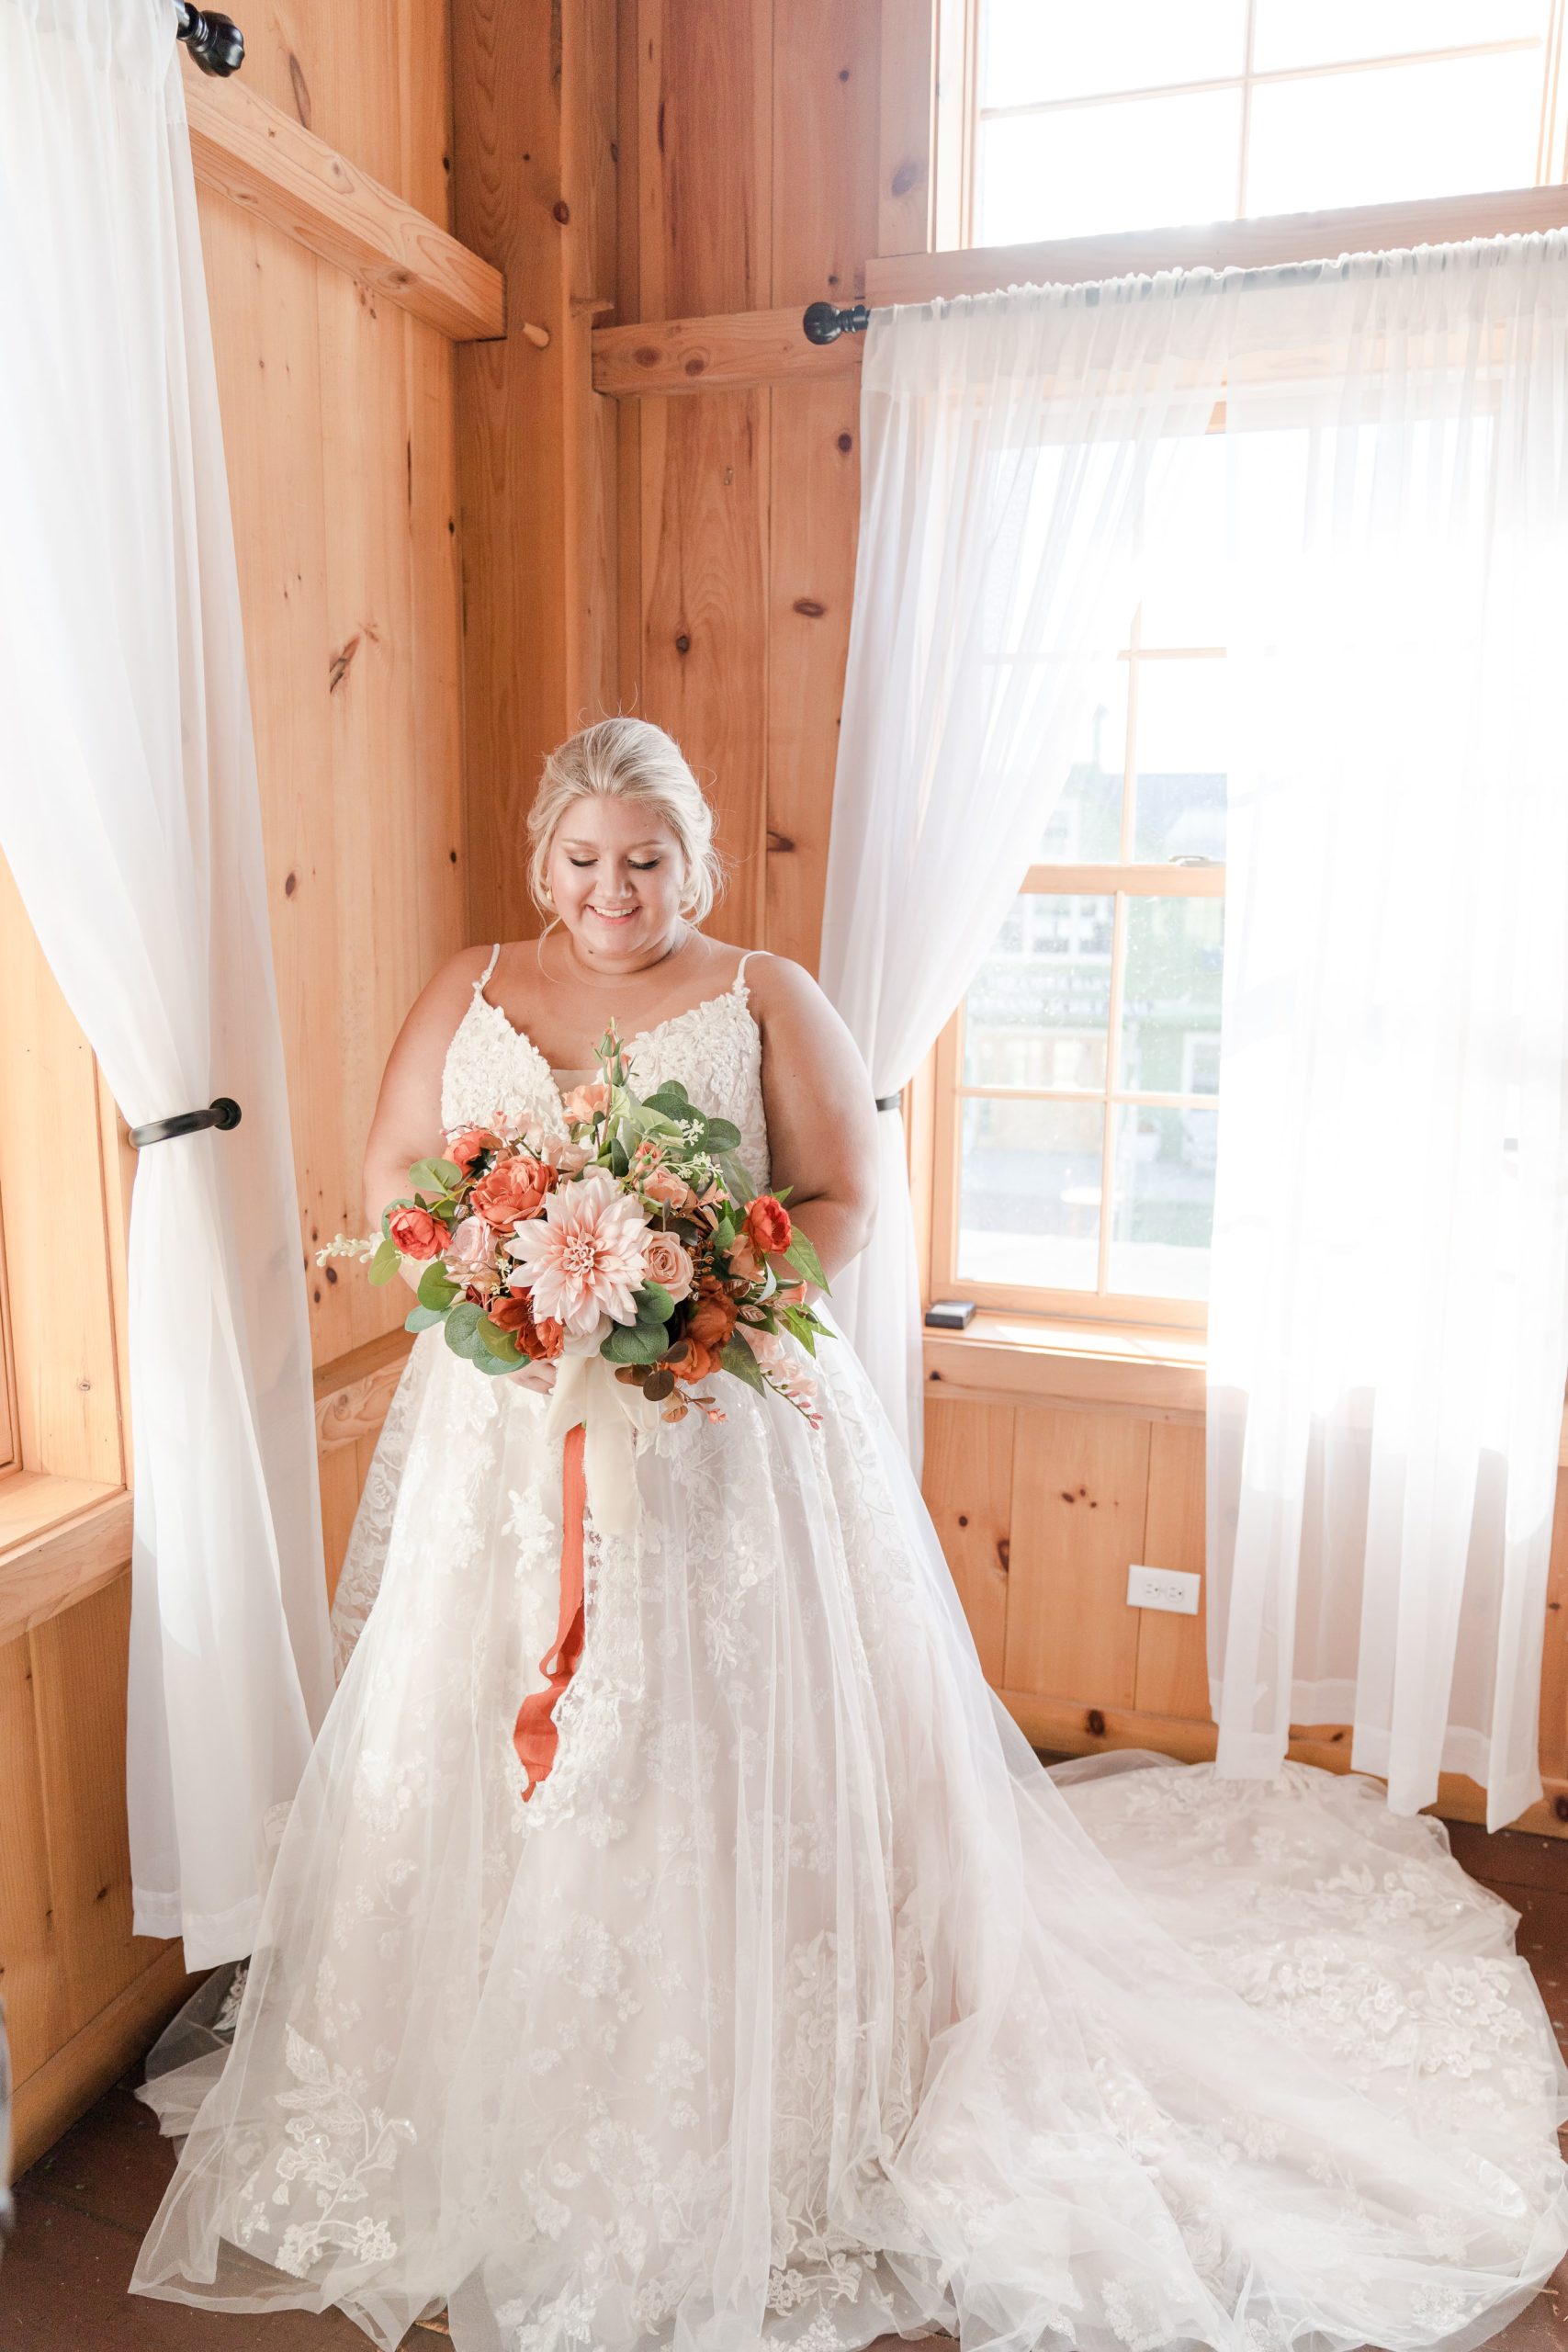 Picture of a bride standing with bouquet of flowers in her wedding dress in front of a window.